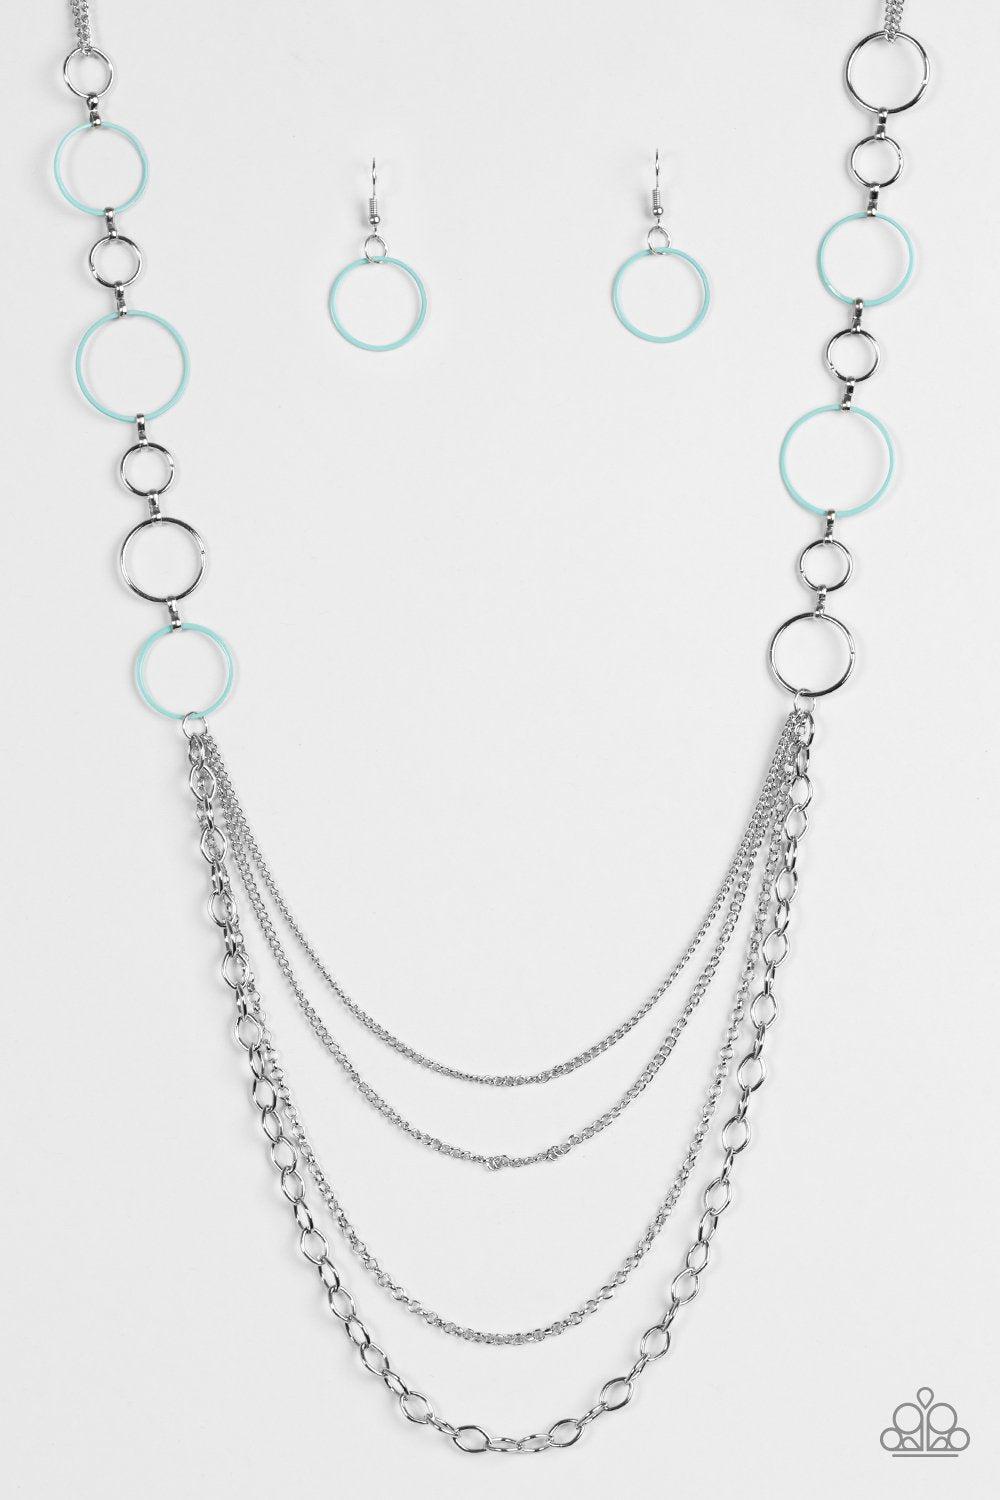 Industrial Circus Silver and Blue Necklace - Paparazzi Accessories-CarasShop.com - $5 Jewelry by Cara Jewels